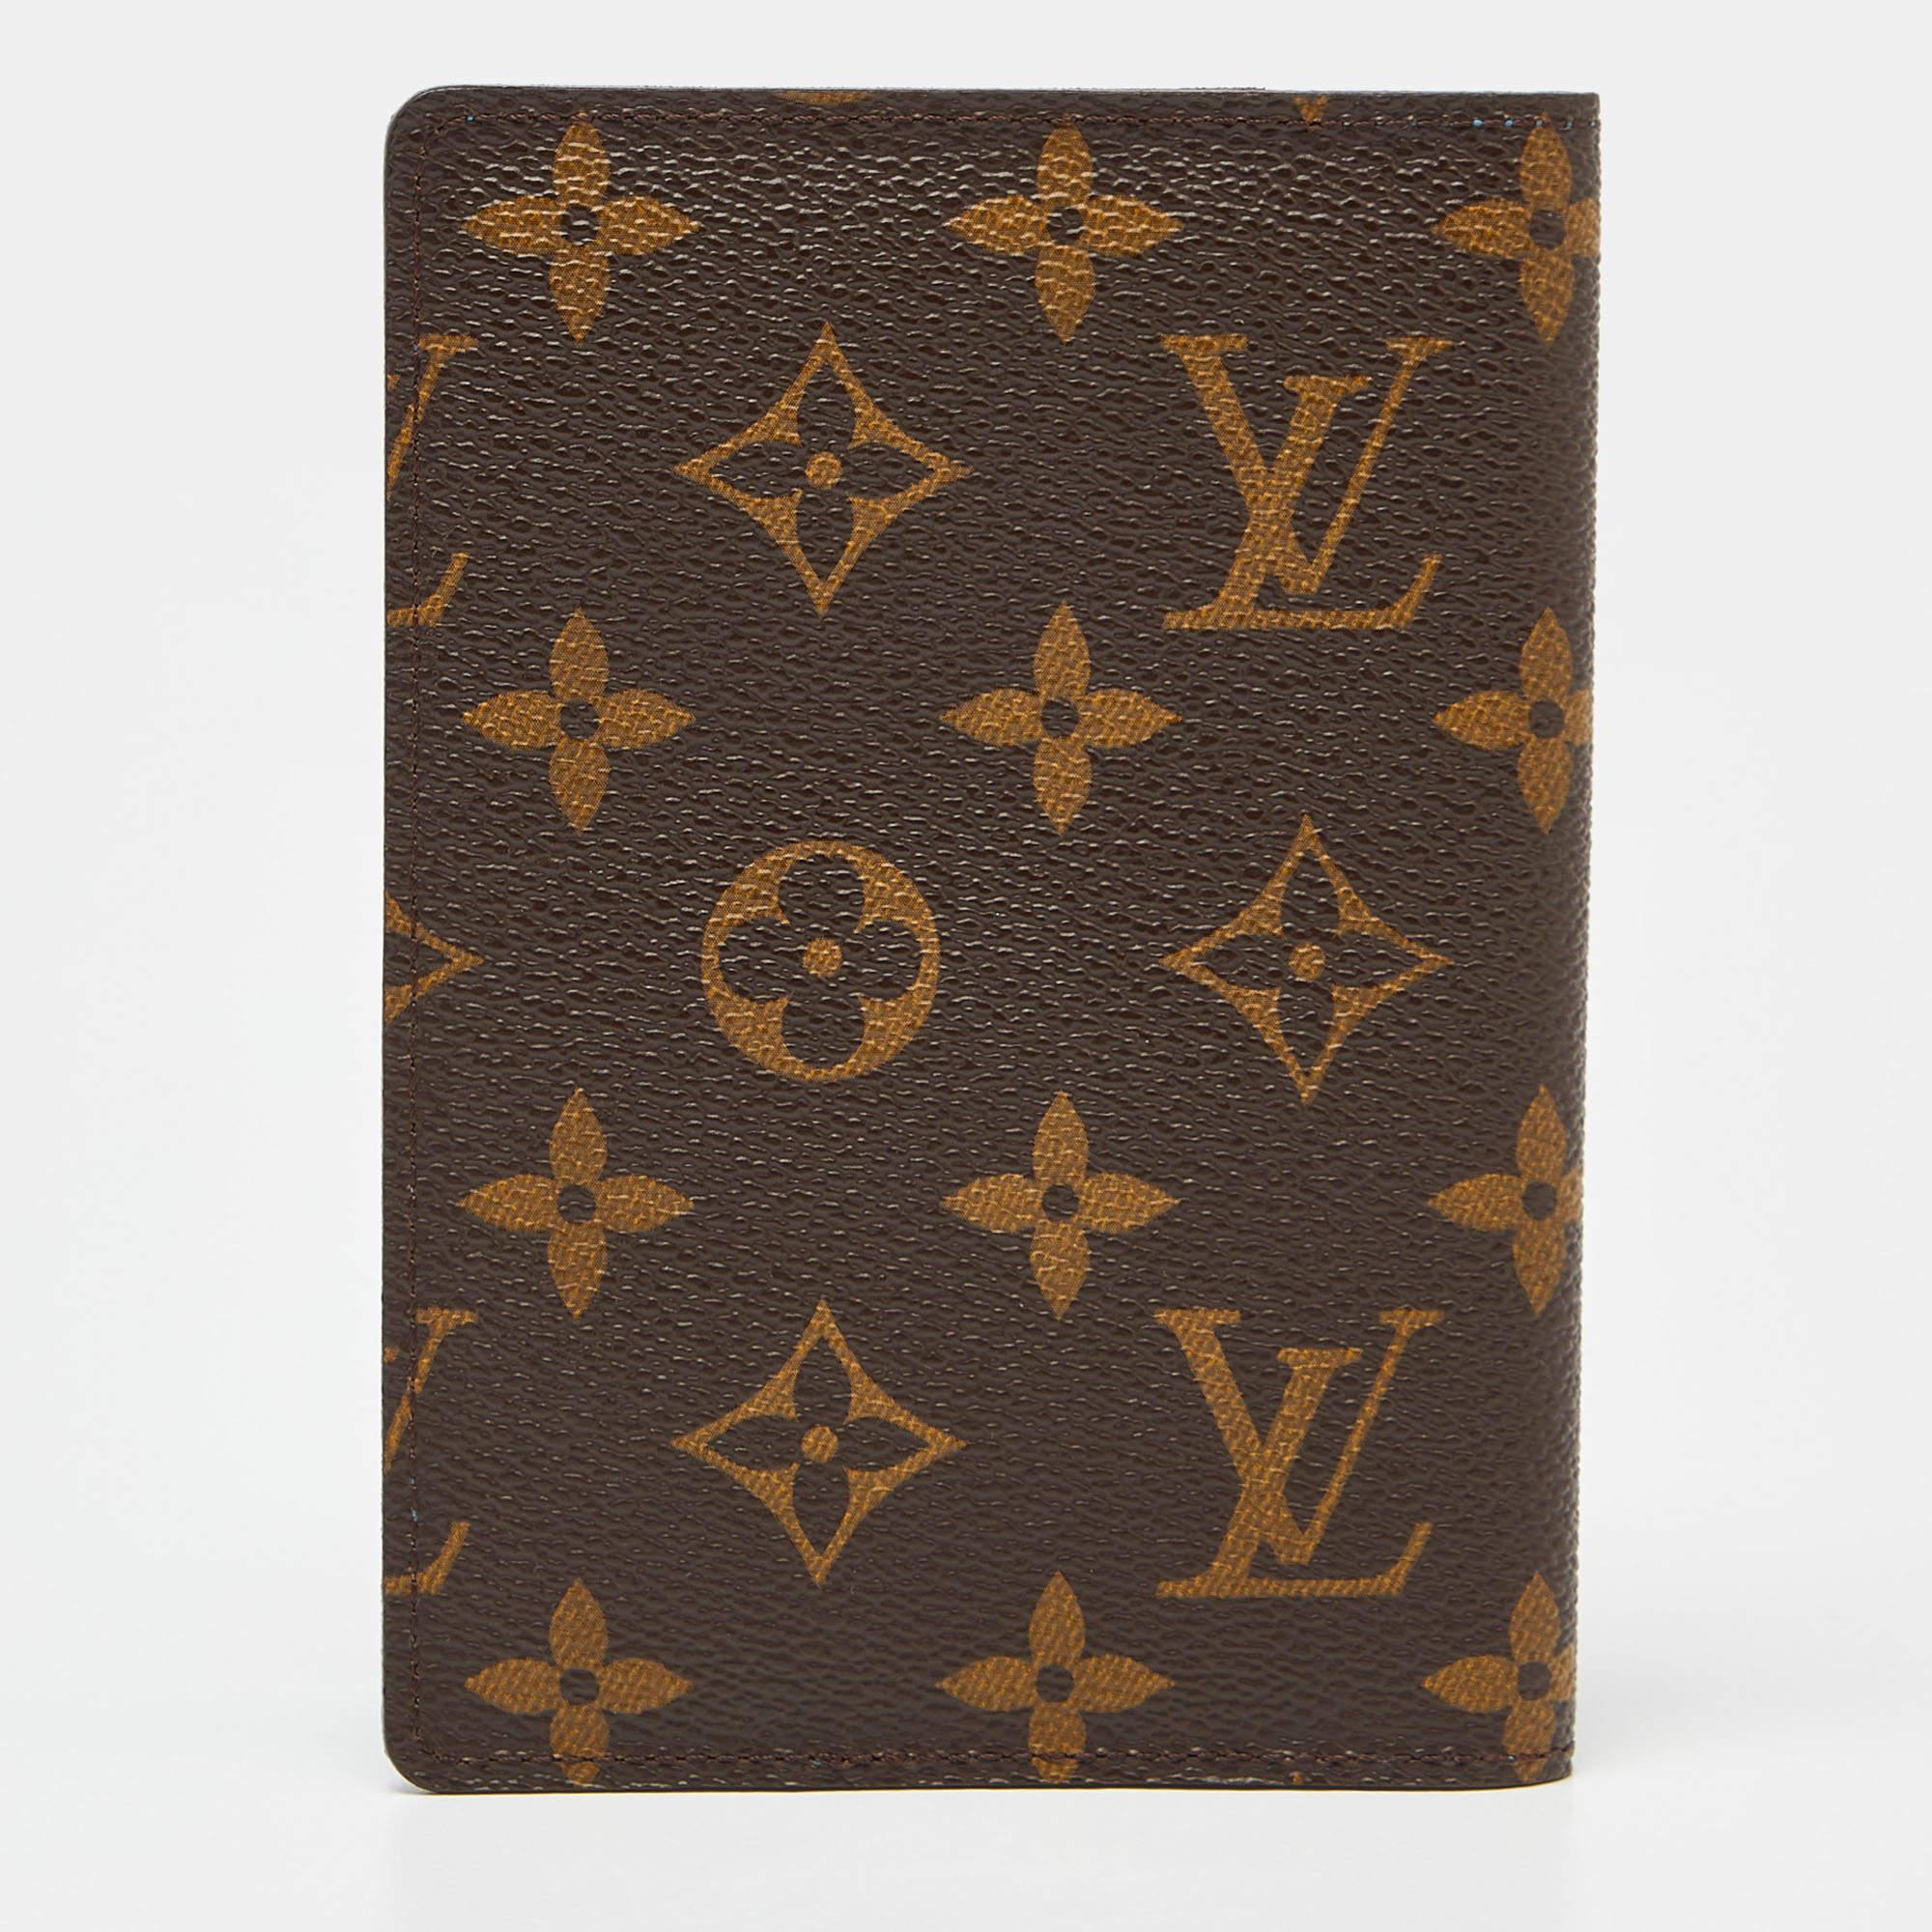 The Louis Vuitton My LV Heritage passport cover is a luxurious travel accessory. Crafted from the iconic LV monogram canvas, it features a sleek design, multiple card slots, and a passport compartment, making it an elegant and practical choice for